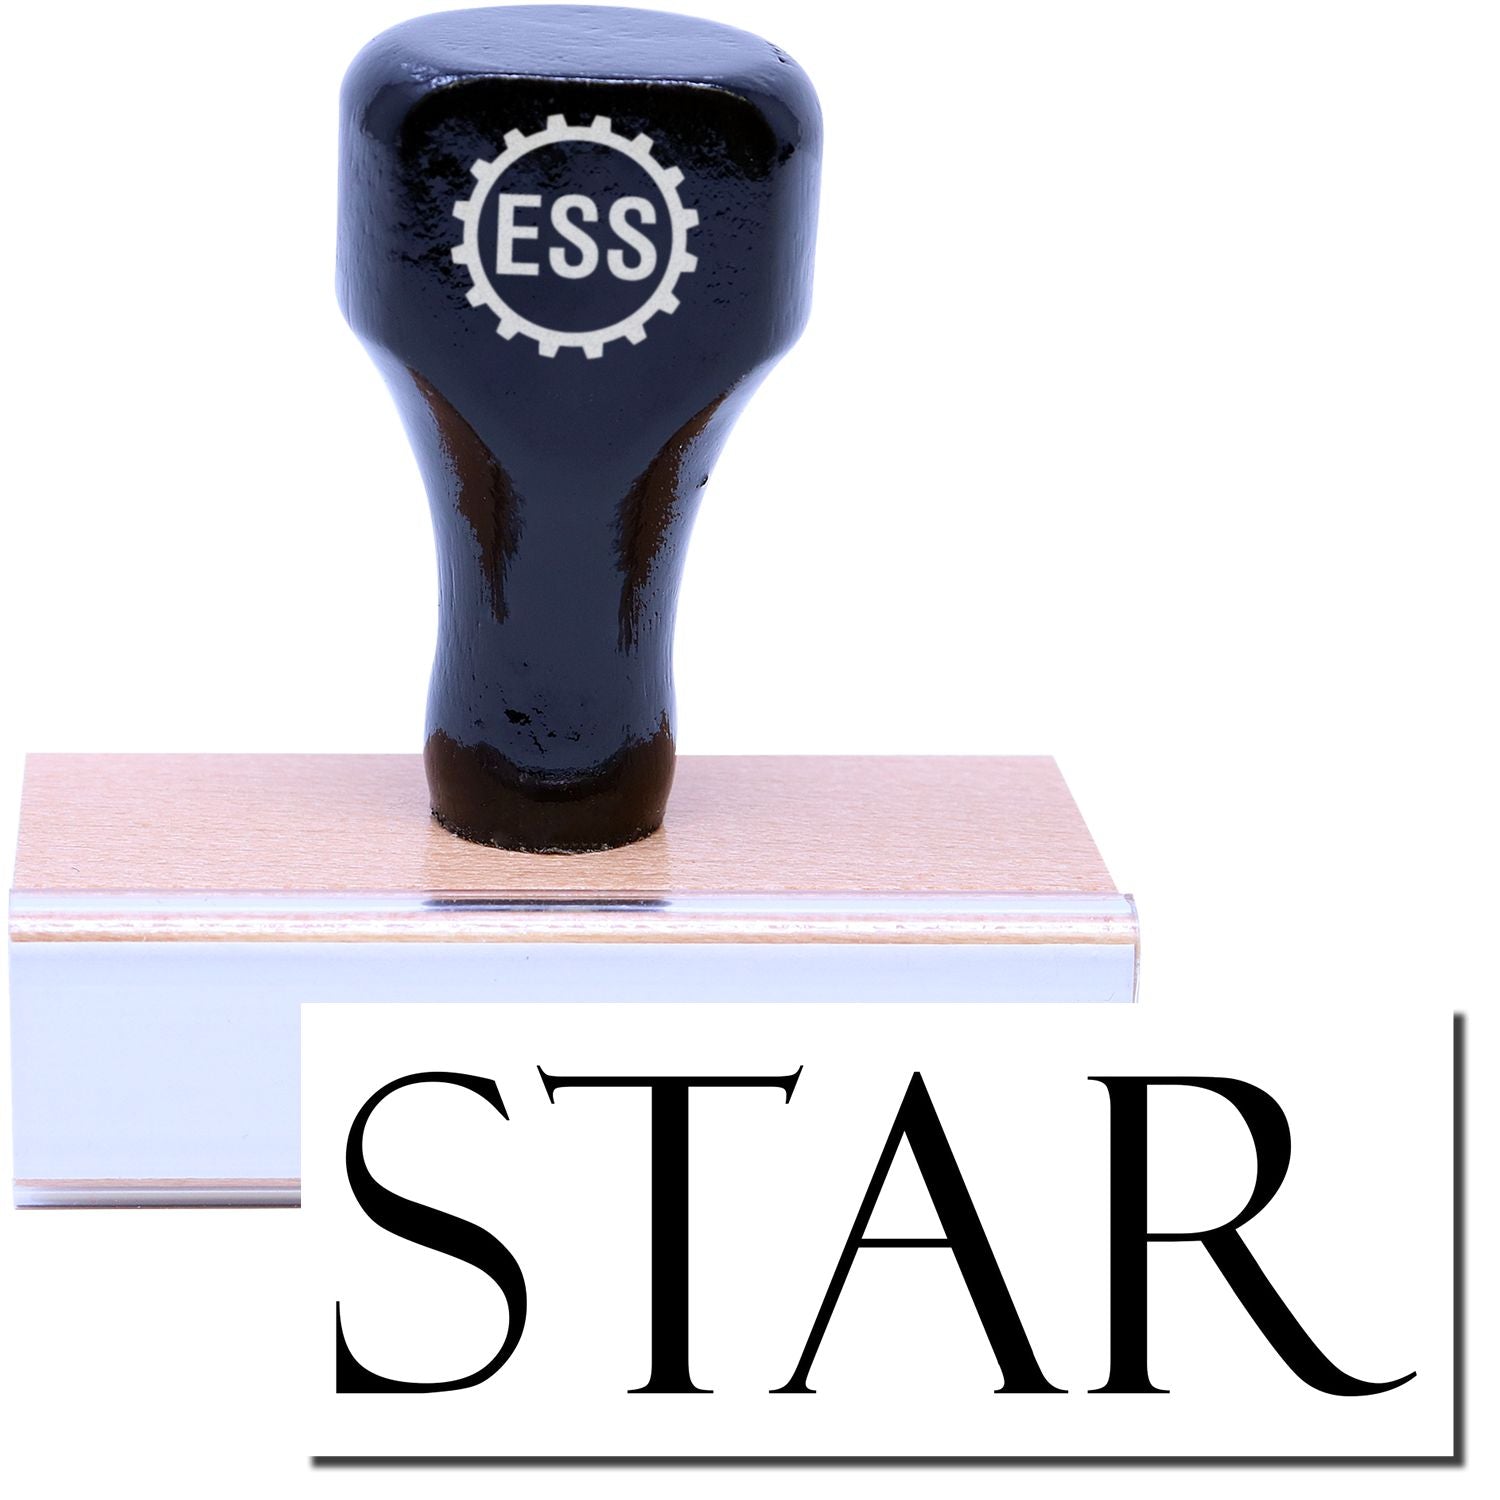 A stock office rubber stamp with a stamped image showing how the text "STAR" in a large font is displayed after stamping.